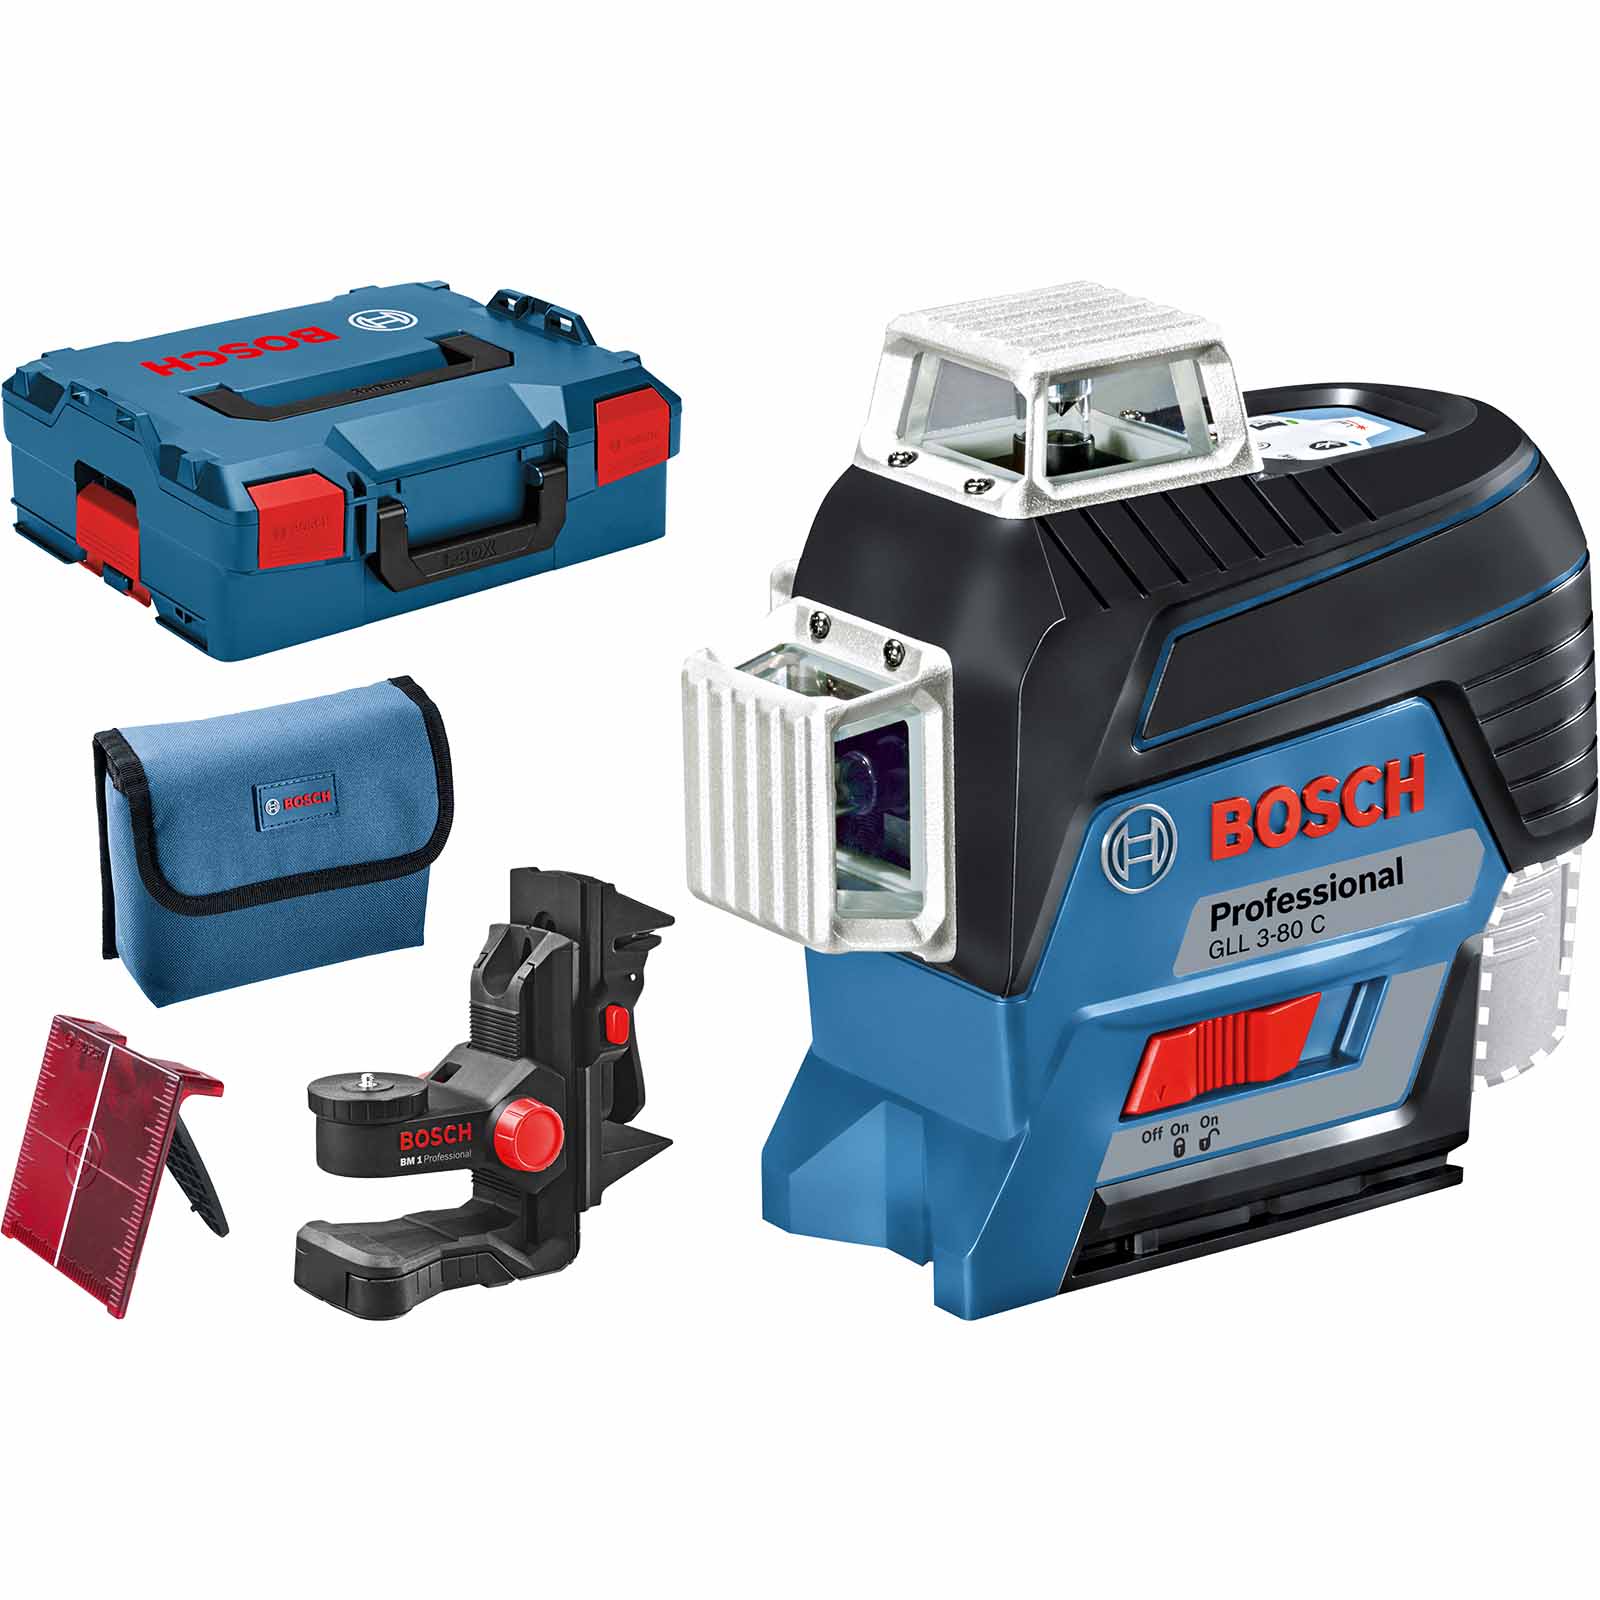 Bosch GLL 3-80 C 12v Cordless Connected Line Laser Level No Batteries No Charger Case